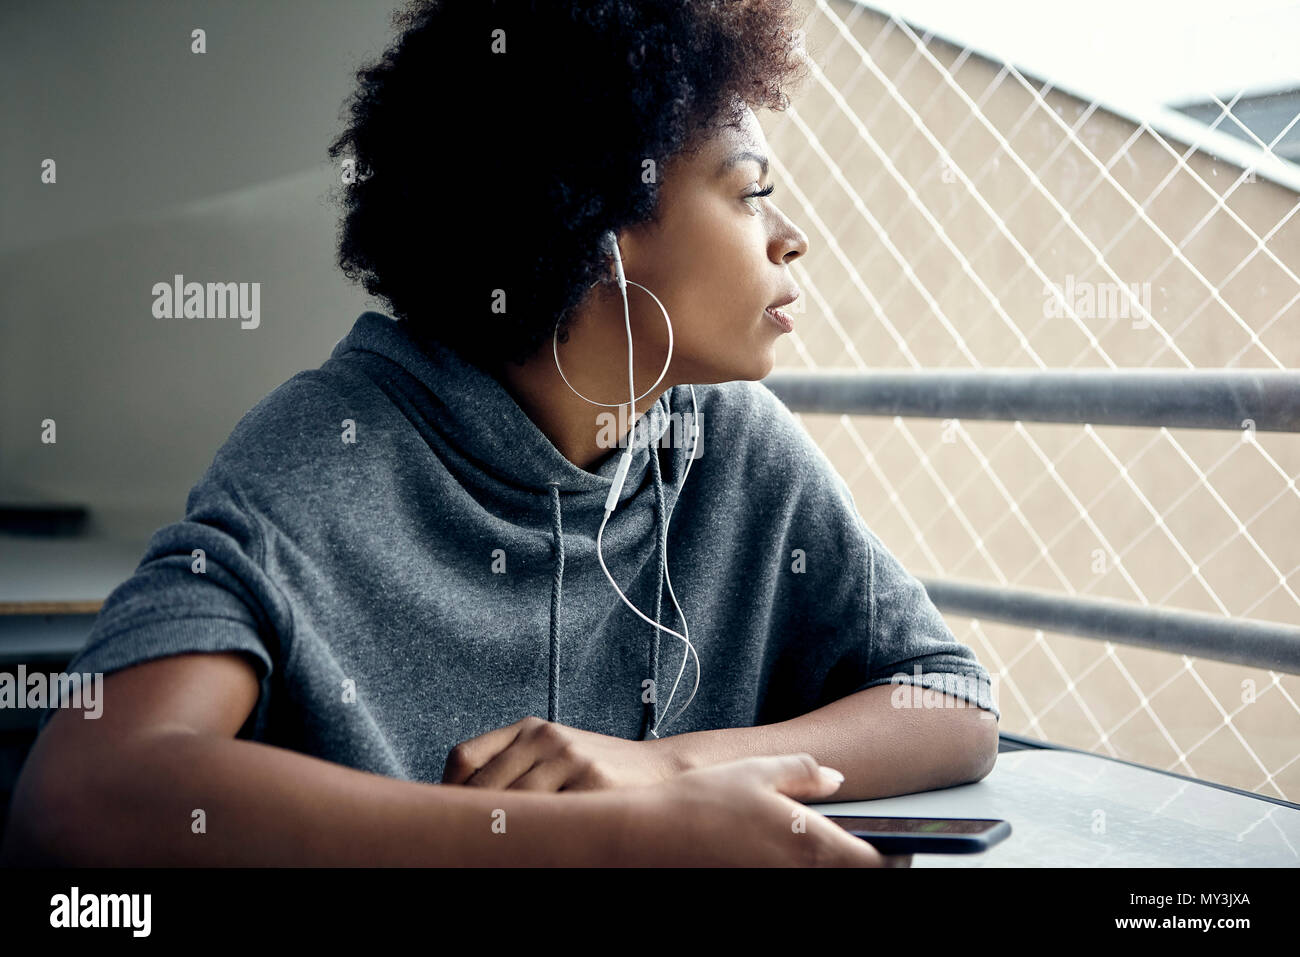 Young woman listening to earphones and gazing out window Stock Photo